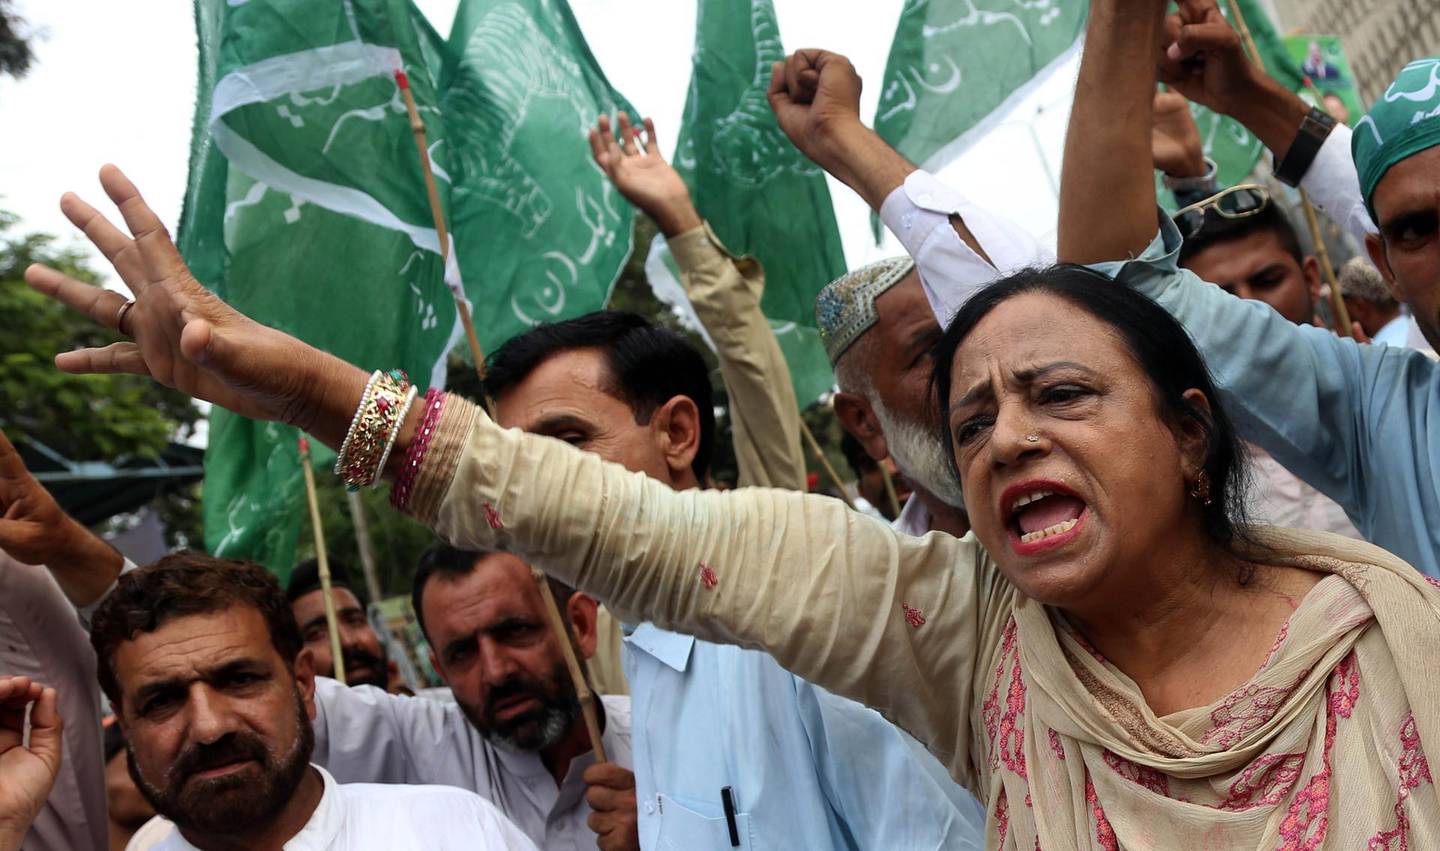 epa06915895 Supporters of Pakistan Muslim League Nawaz (PMLN) party which recently concluded its mandate shout slogans during a protest against alleged rigging in general elections, in Karachi, Pakistan, 28 July 2018. Pakistan's outgoing ruling party joined a dozen other parties on 27 July in announcing protests to demand a re-do of this week's general elections, rejecting preliminary results that point to victory for the party of retired cricket great Imran Khan.  EPA/REHAN KHAN